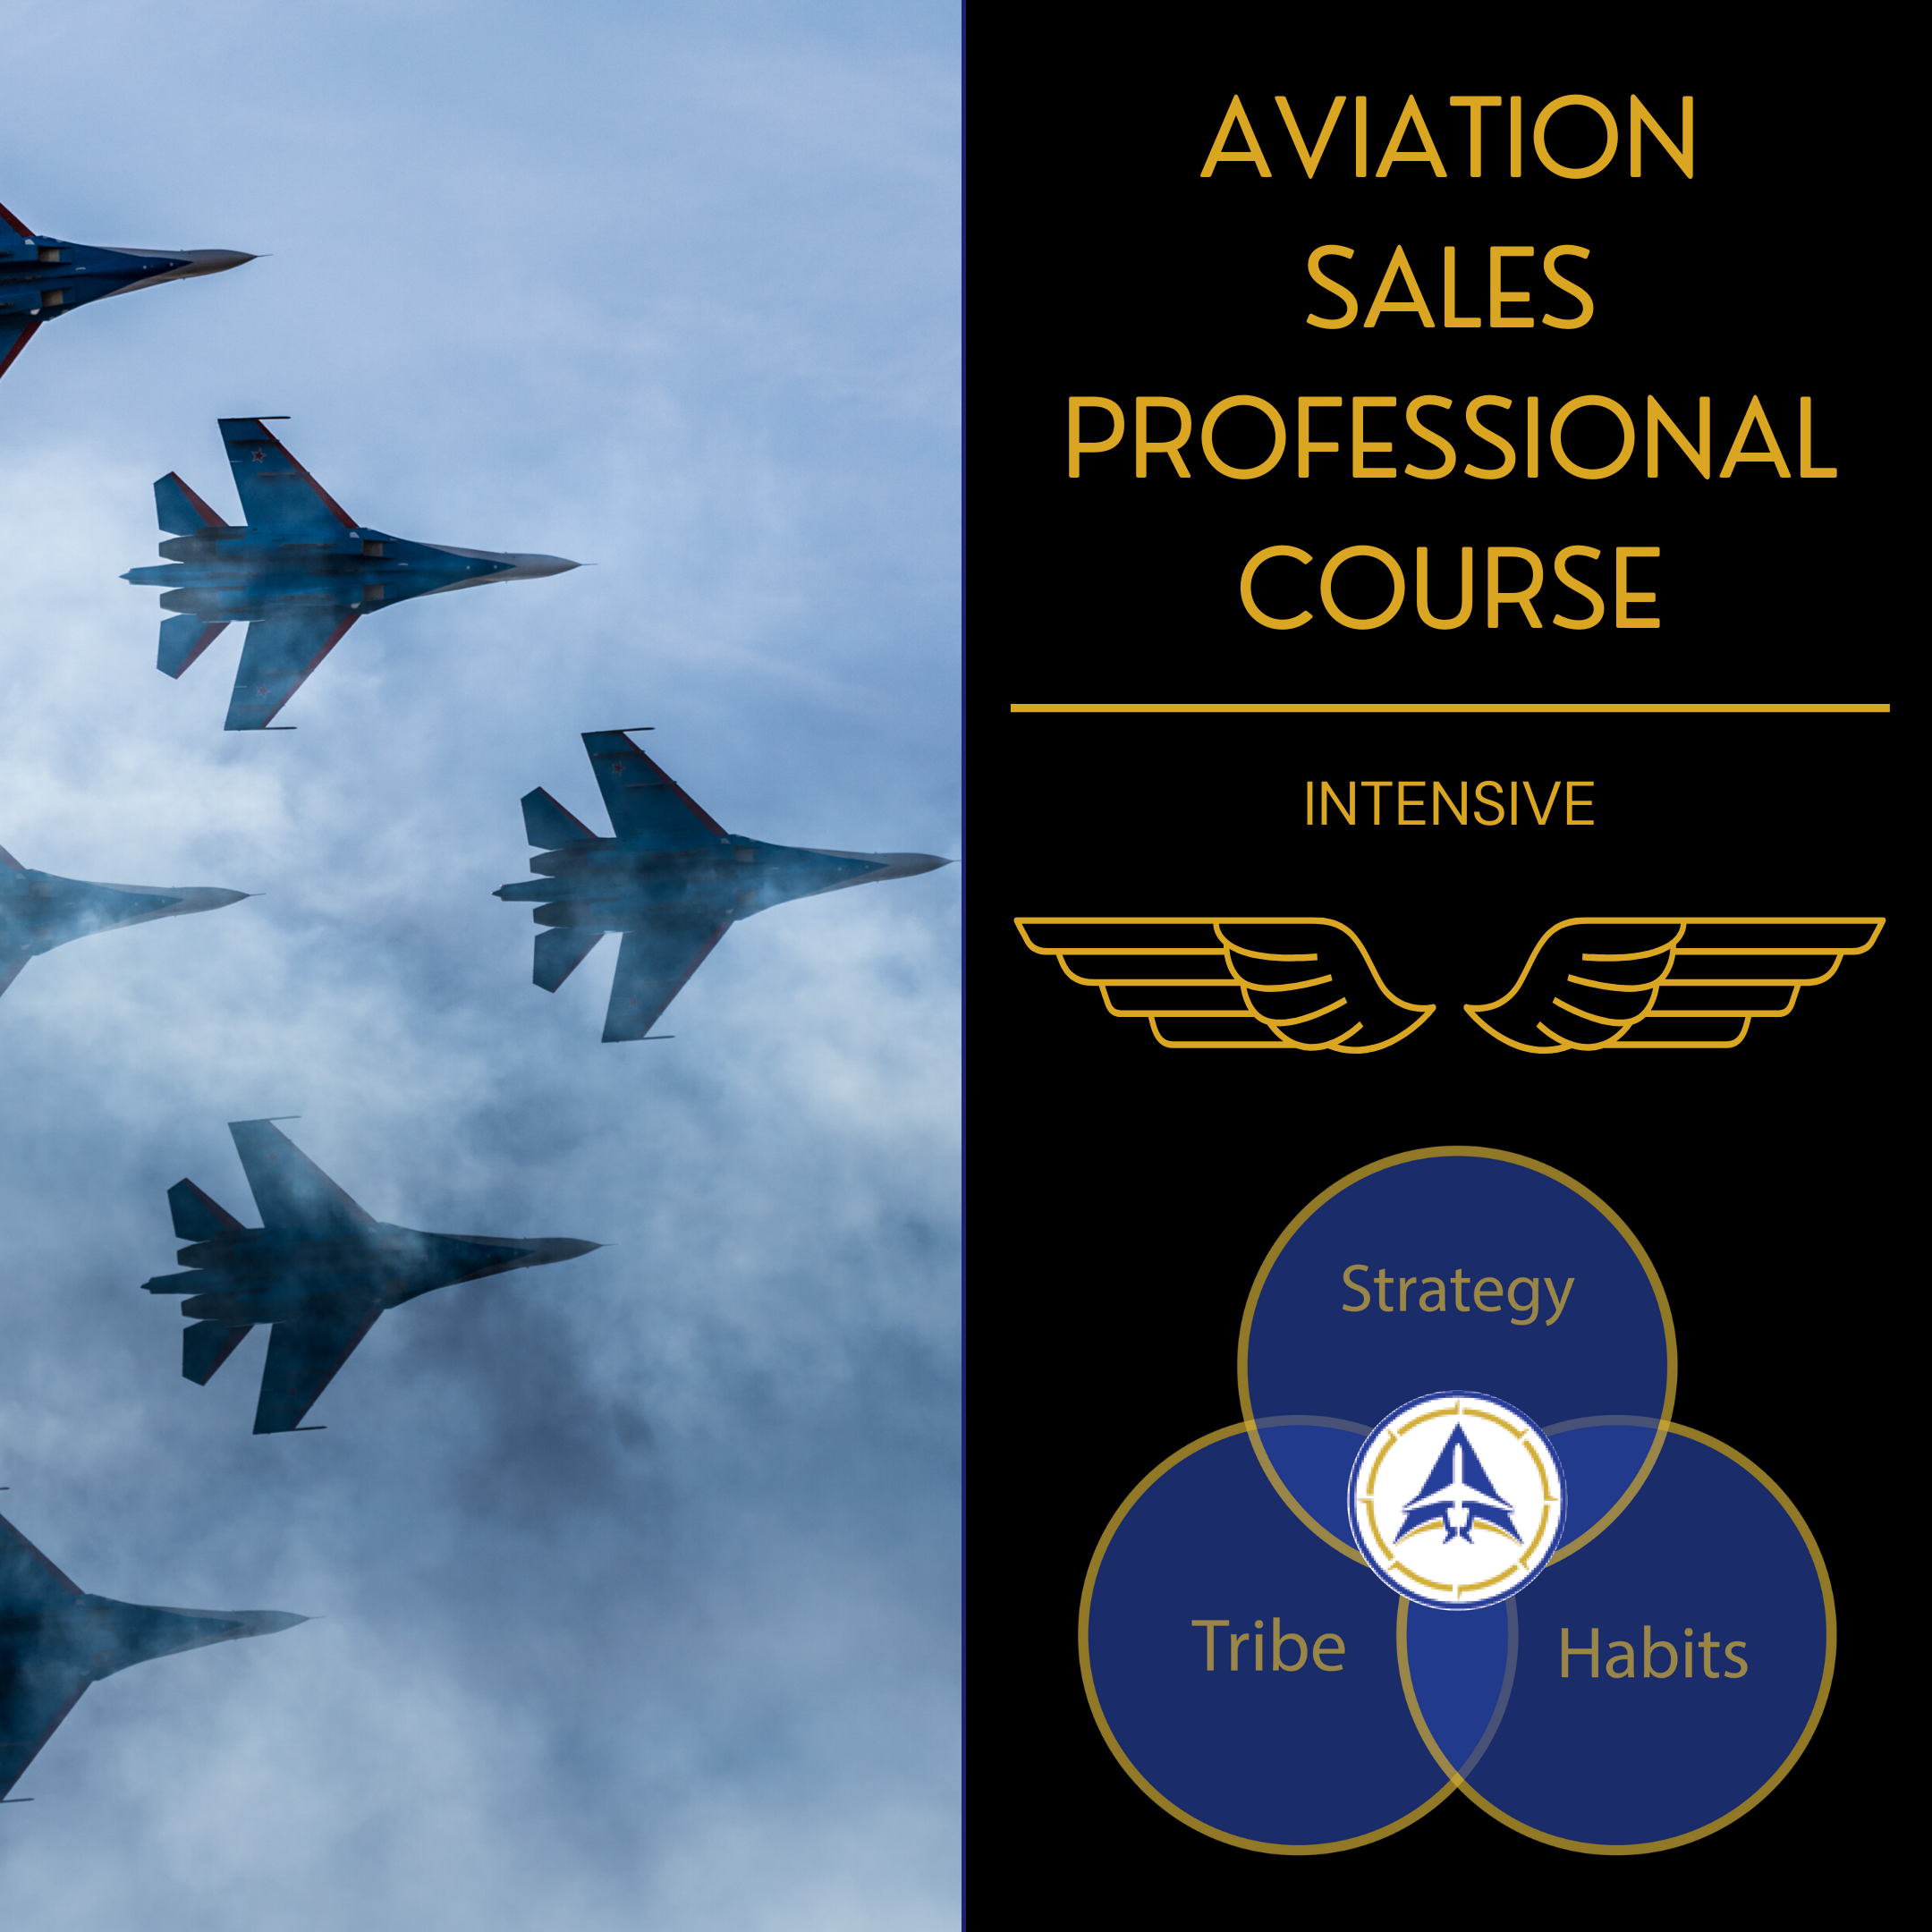 Aviation Sales Professional Course